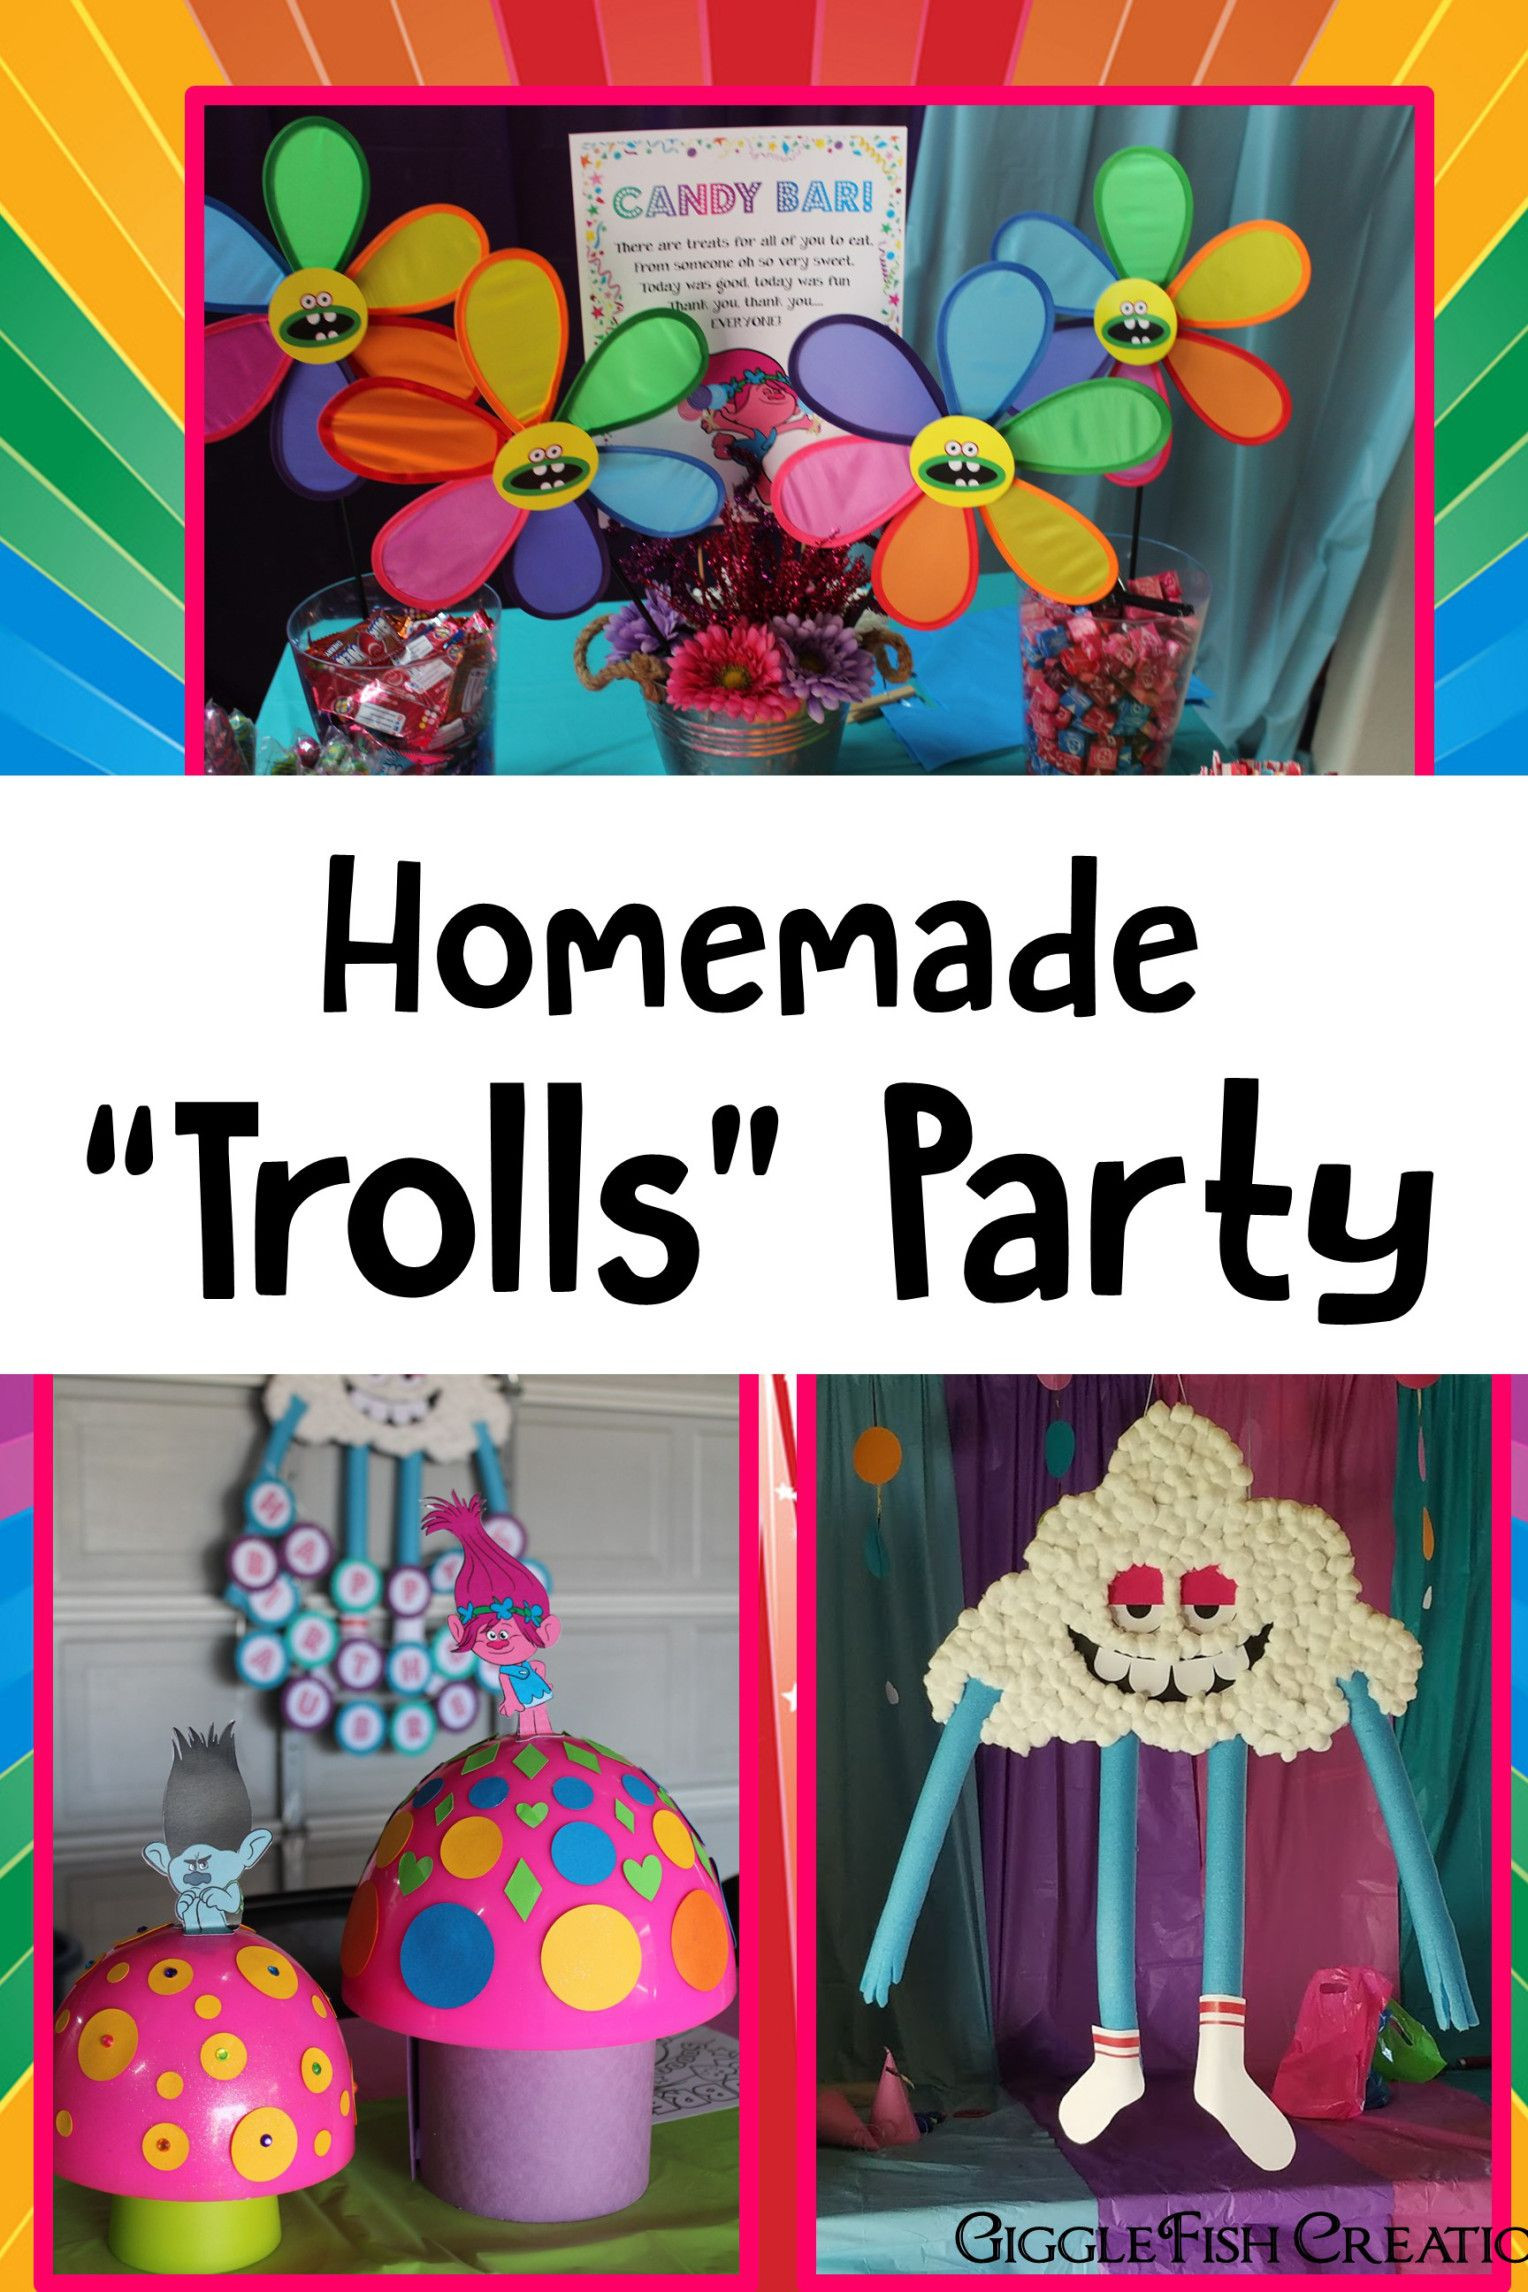 Trolls Party Ideas For Girl
 Pin on Candy Shop Party